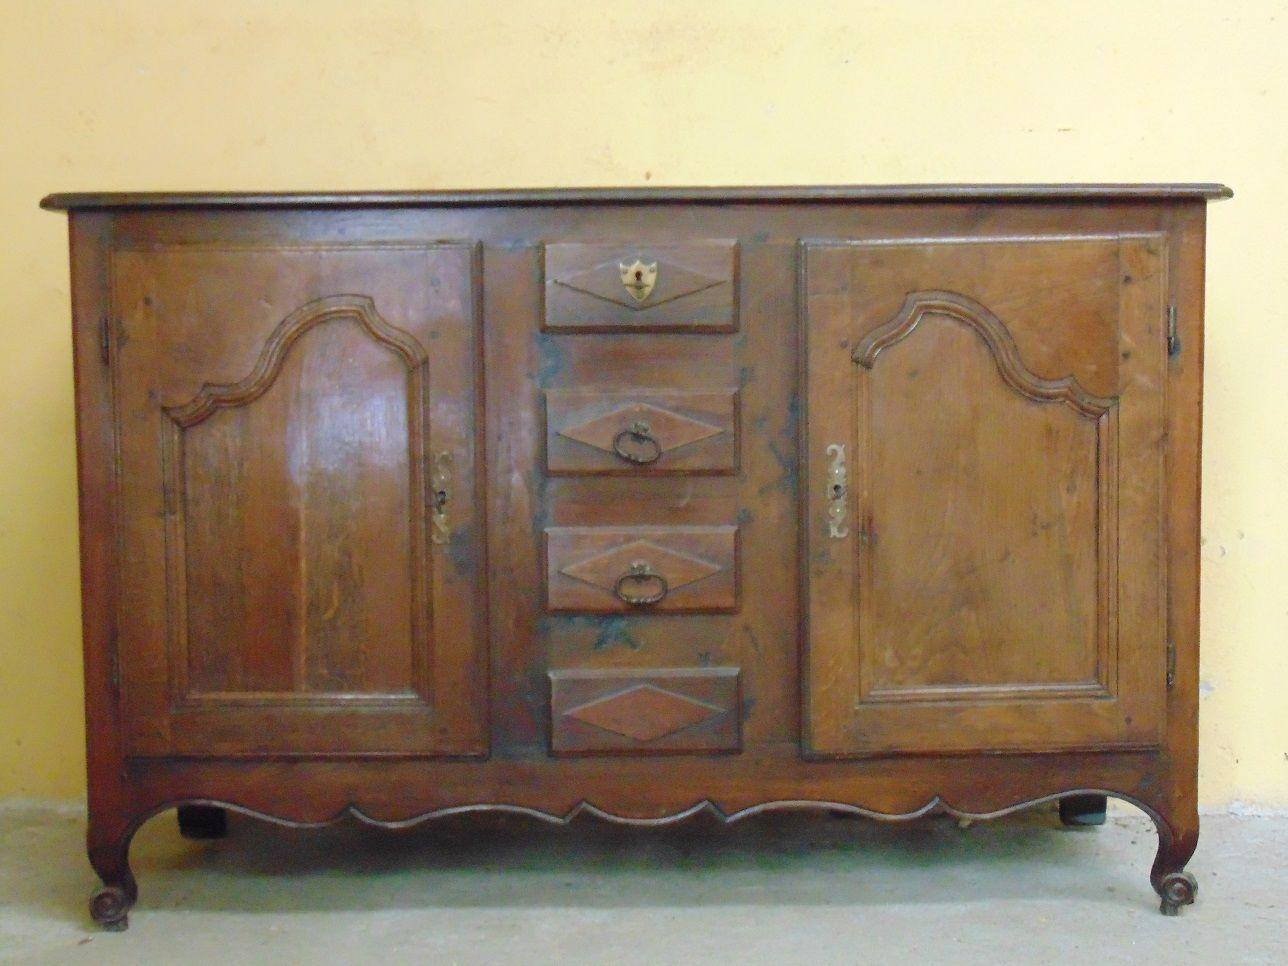 Original circa 1790 this beautiful and rare small oak French Provençal dresser/ sideboard is all original and a beautiful color the bottom drawer is a false one access can only be made by taking out the lockable drawer above - an early safe, apart